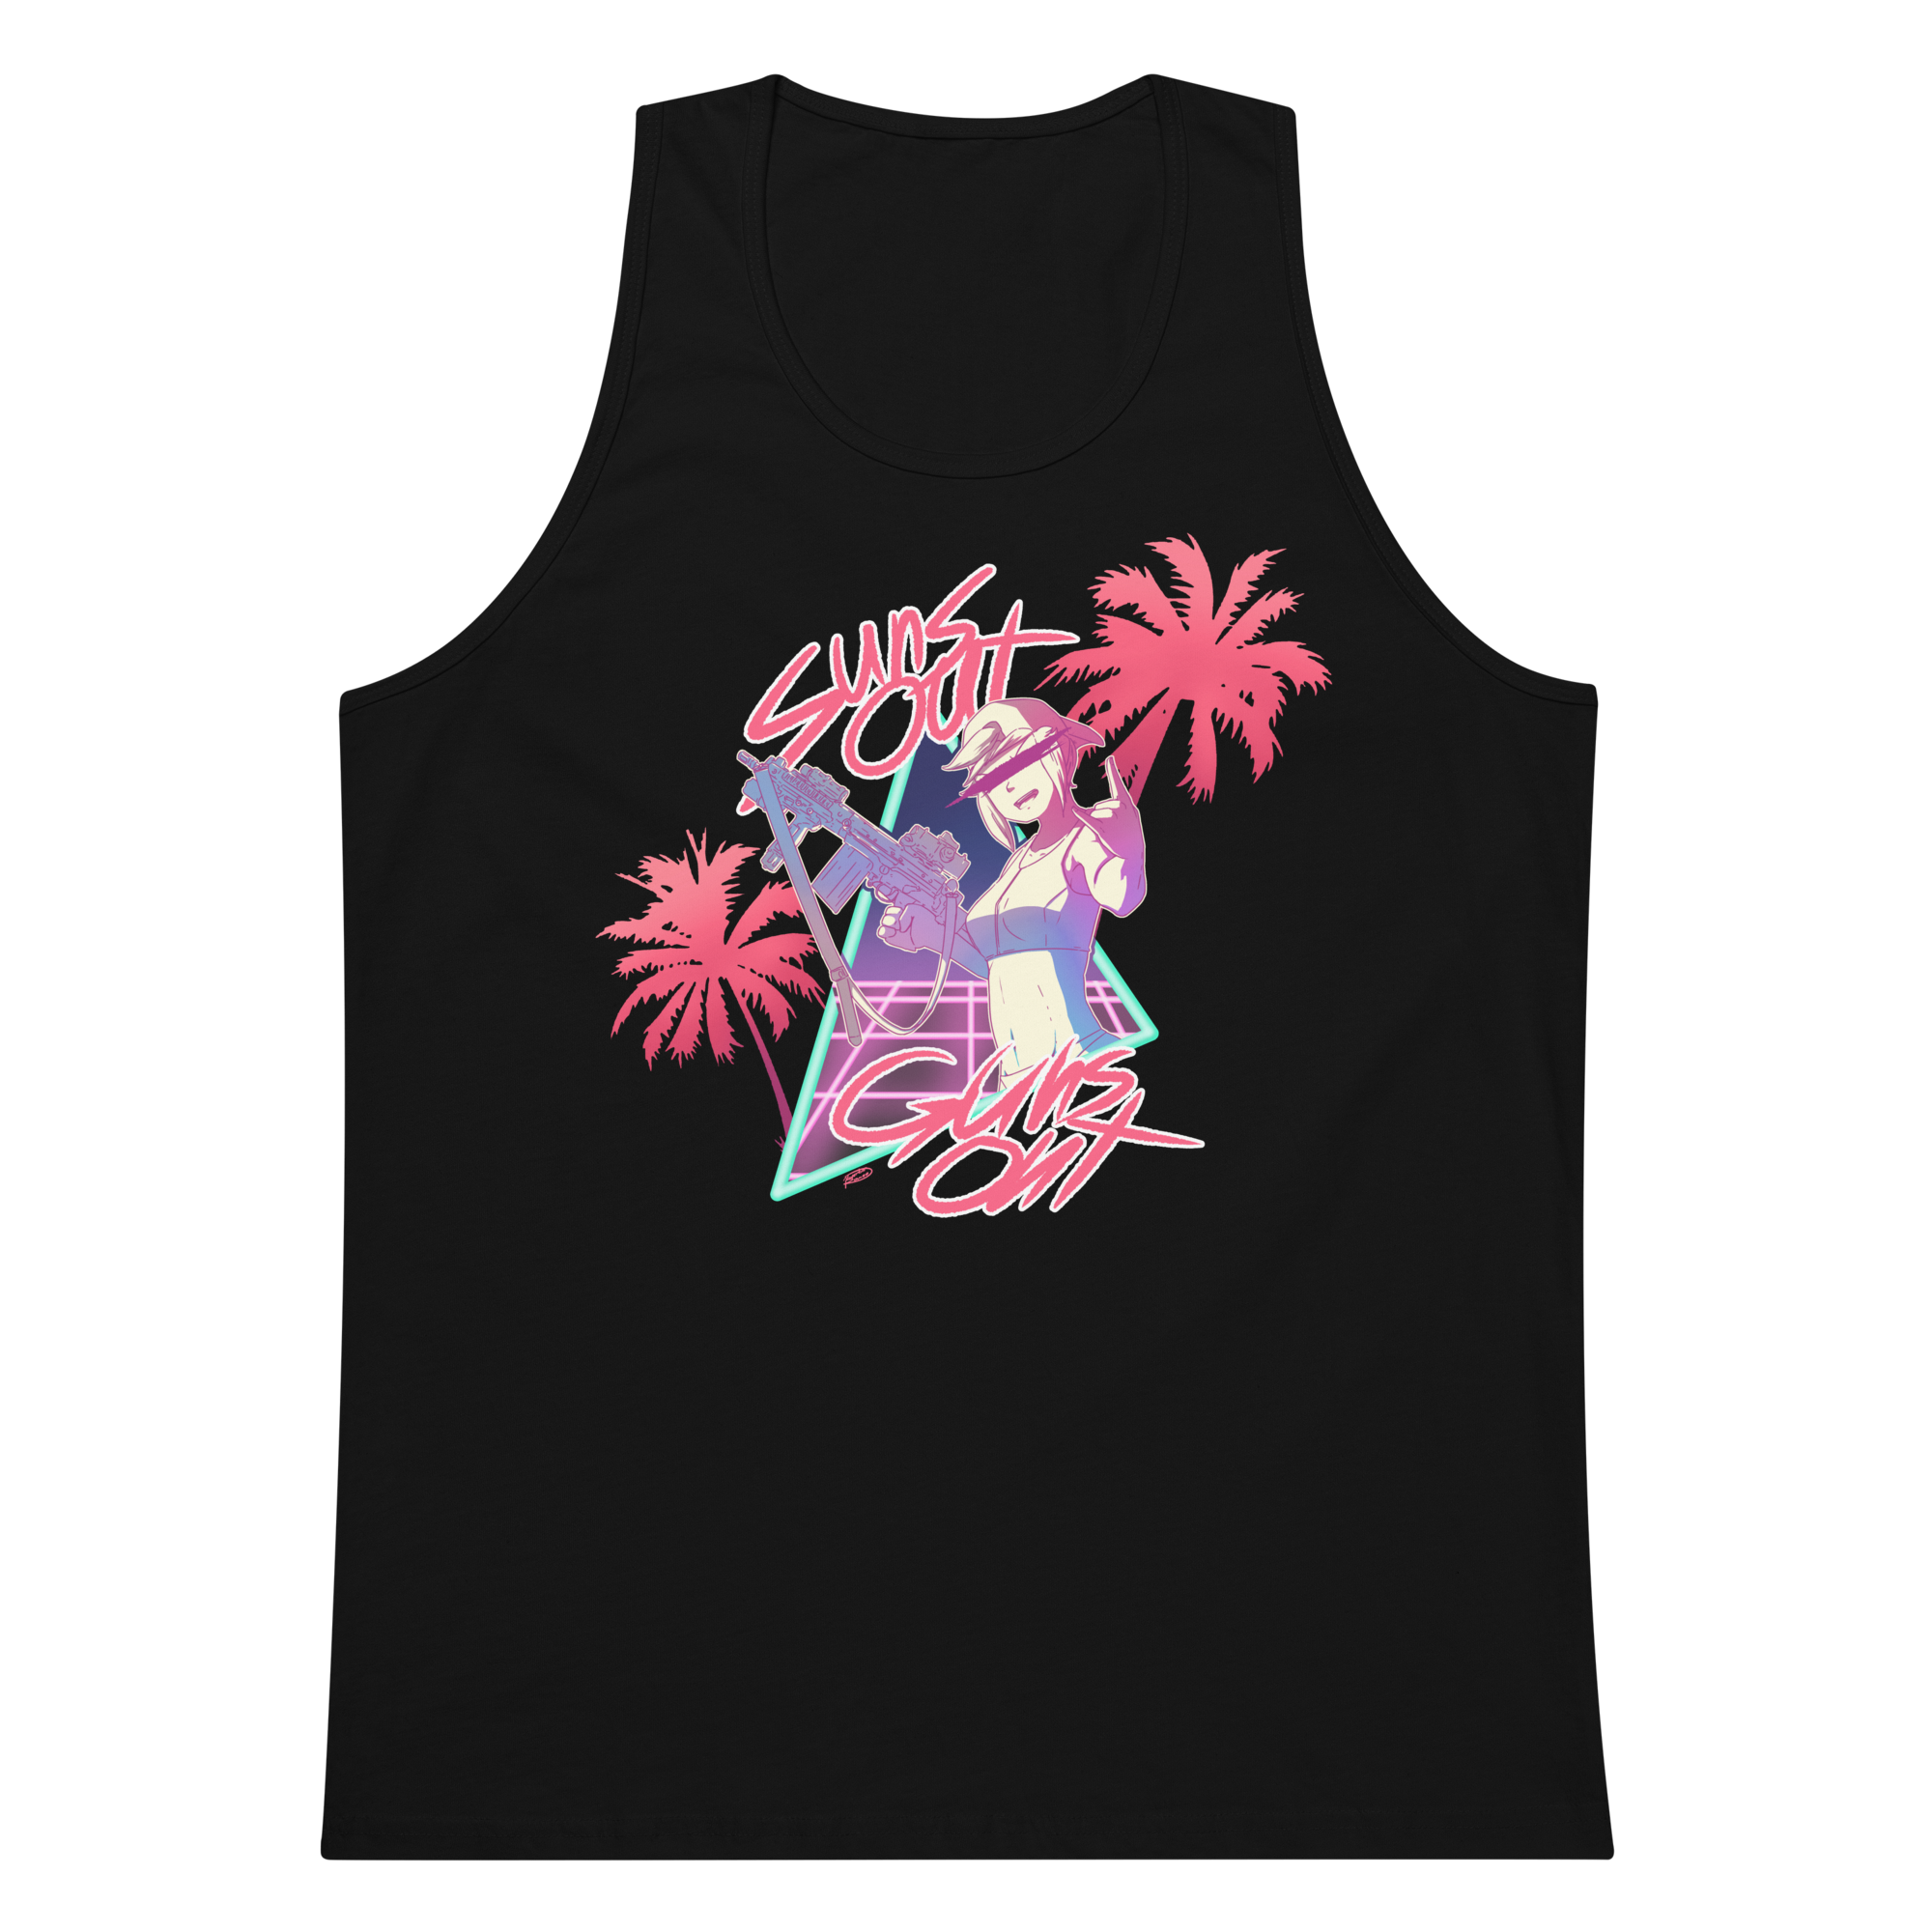 Suns out Guns out [old school design]